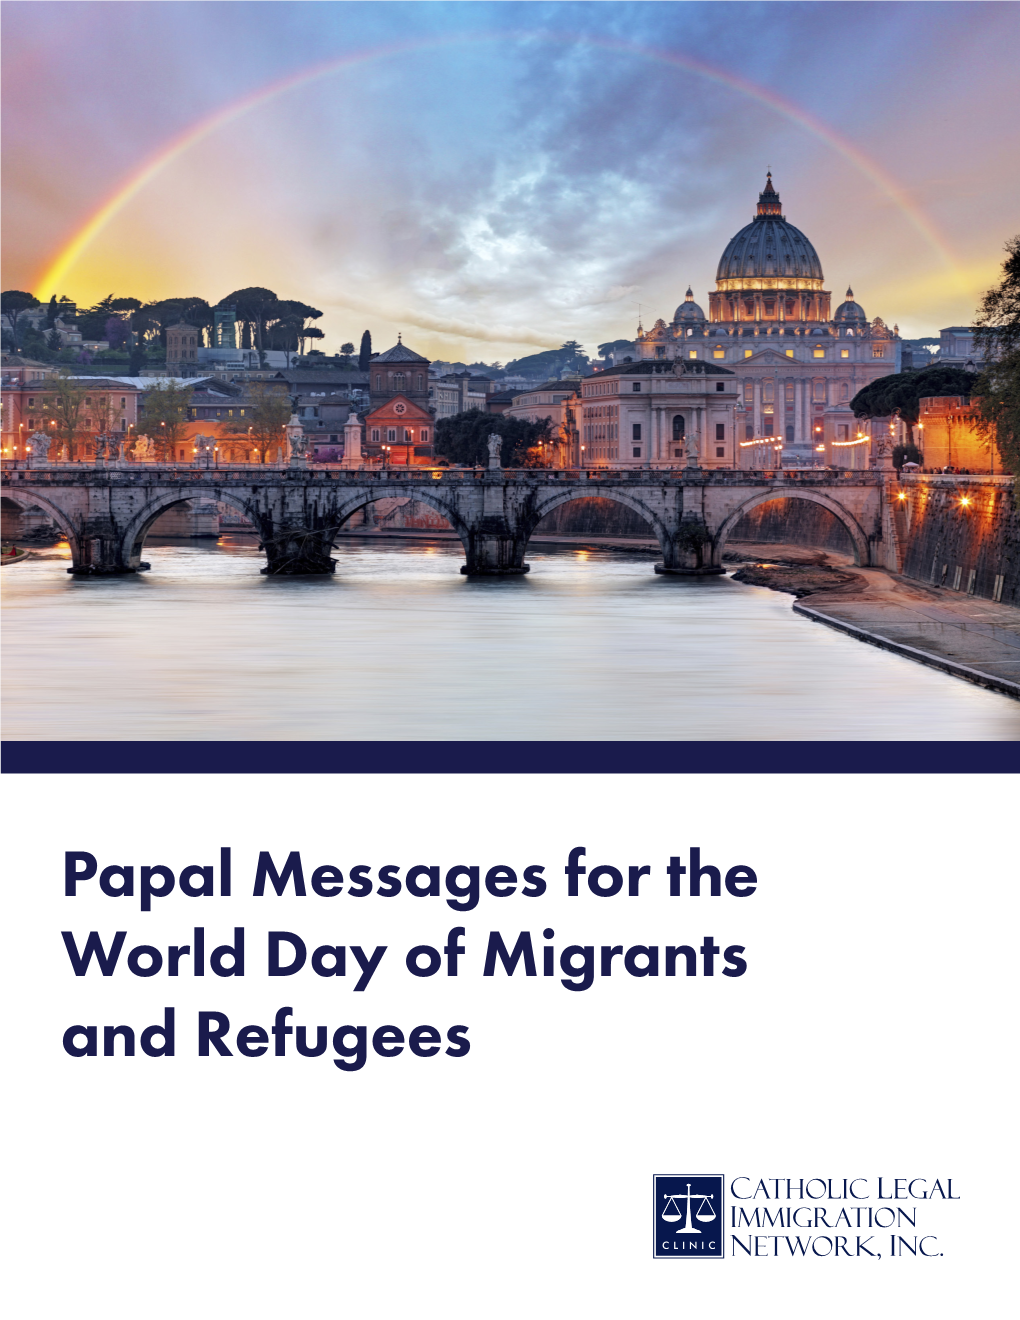 Papal Messages for the World Day of Migrants and Refugees.Pdf